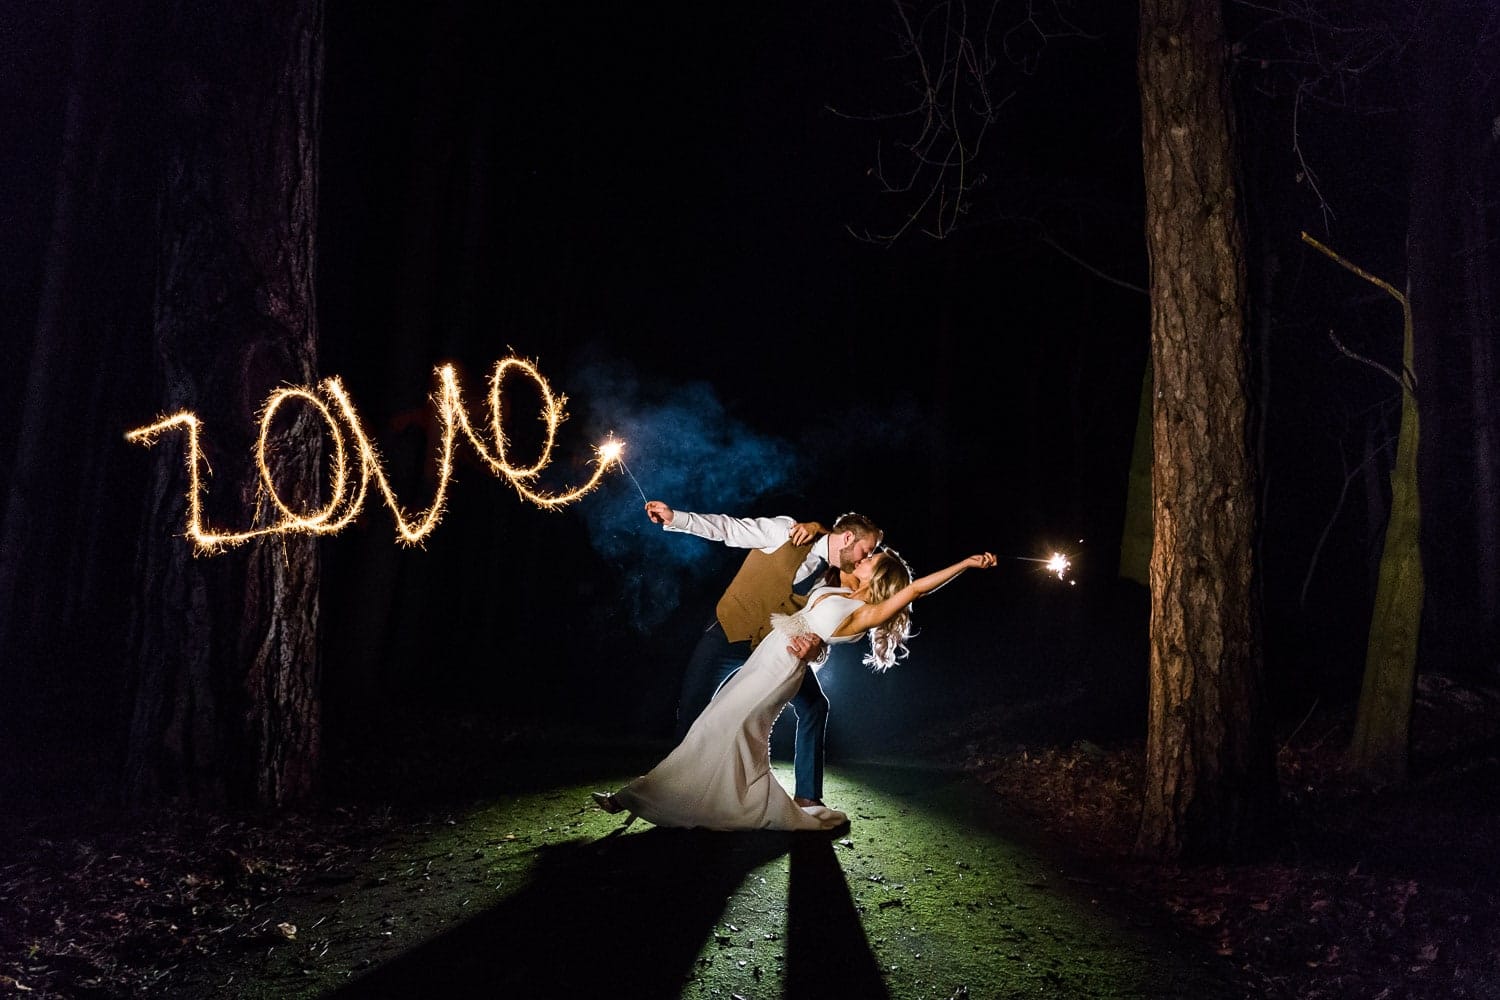 Winter wedding with sparklers